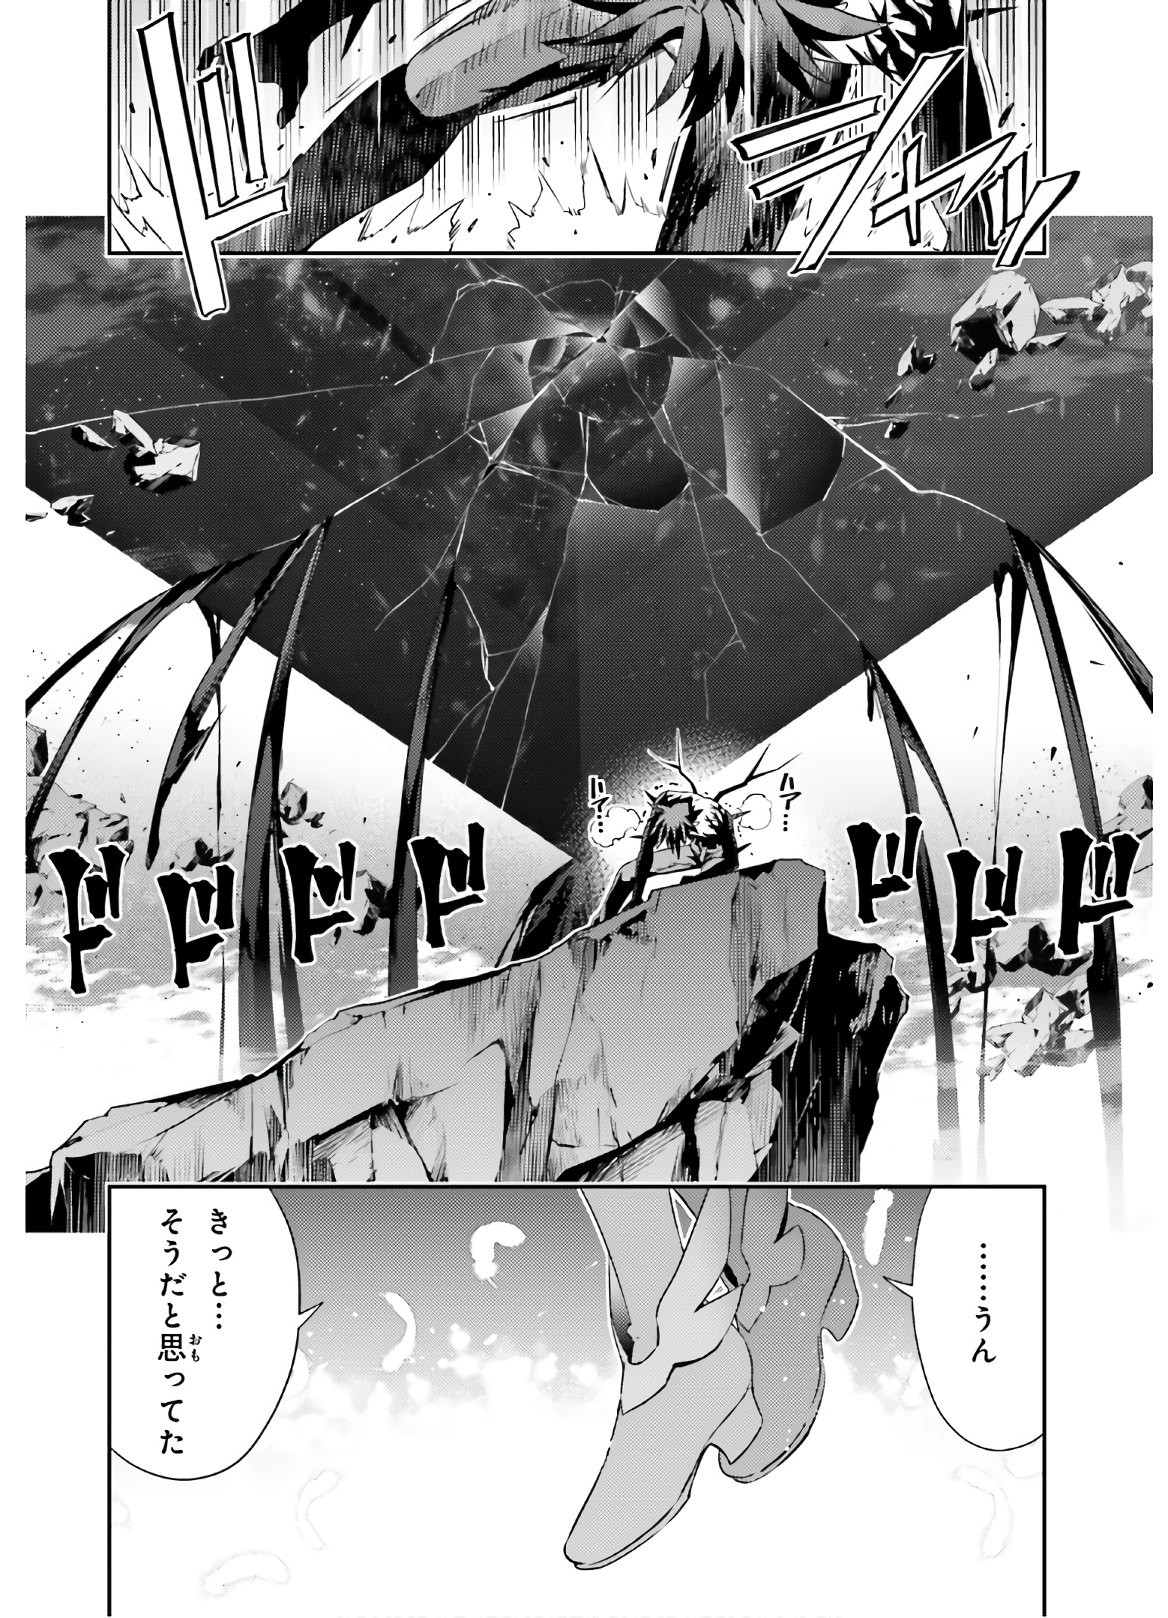 Fate/Kaleid Liner Prisma Illya Drei! - Chapter 57-1 - Page 4